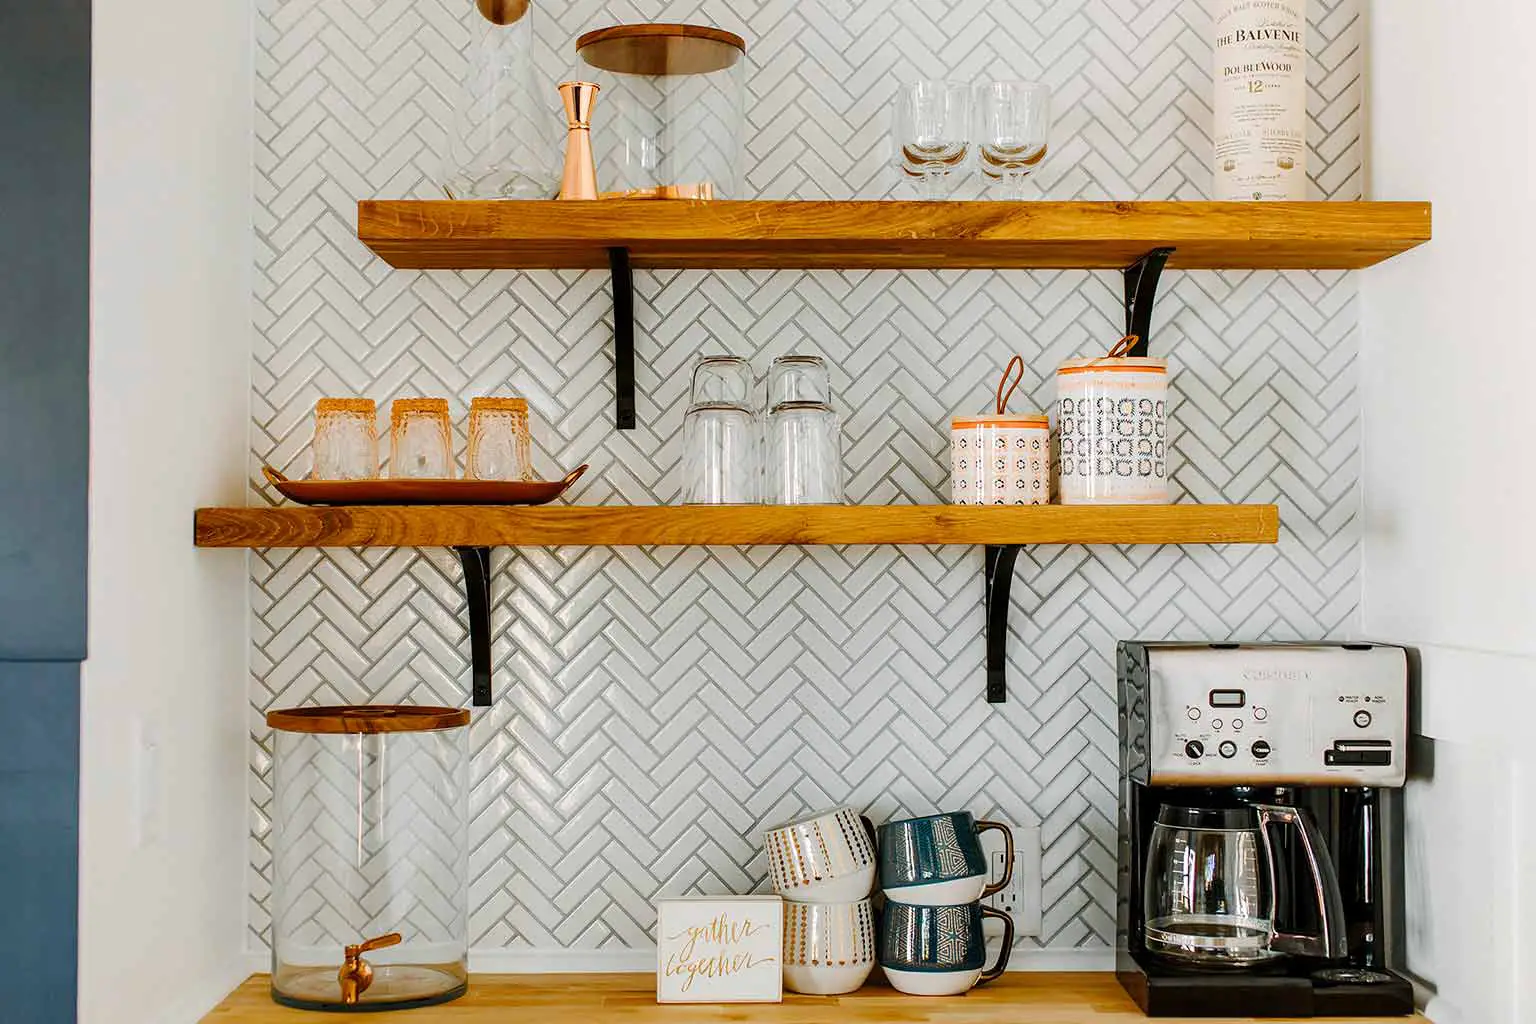 Kitchenette with open shelving and herringbone tile - The Guest House Reveal - That Homebird Life Blog